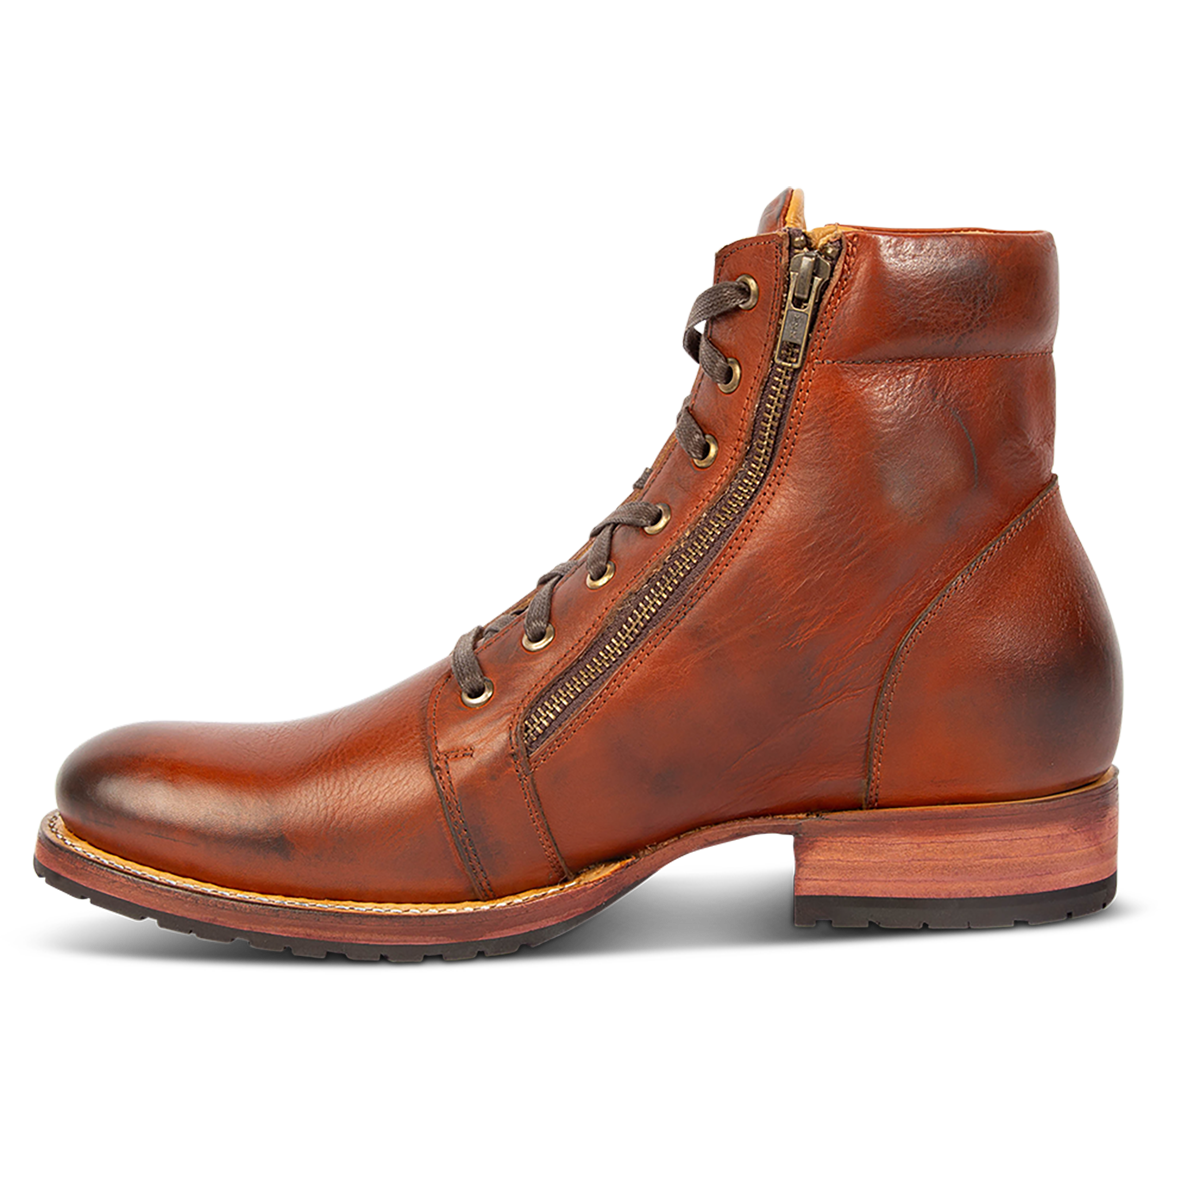 Side view showing brass zipper closure, low block heel and front lacing on FREEBIRD men's Chevy rust leather boot